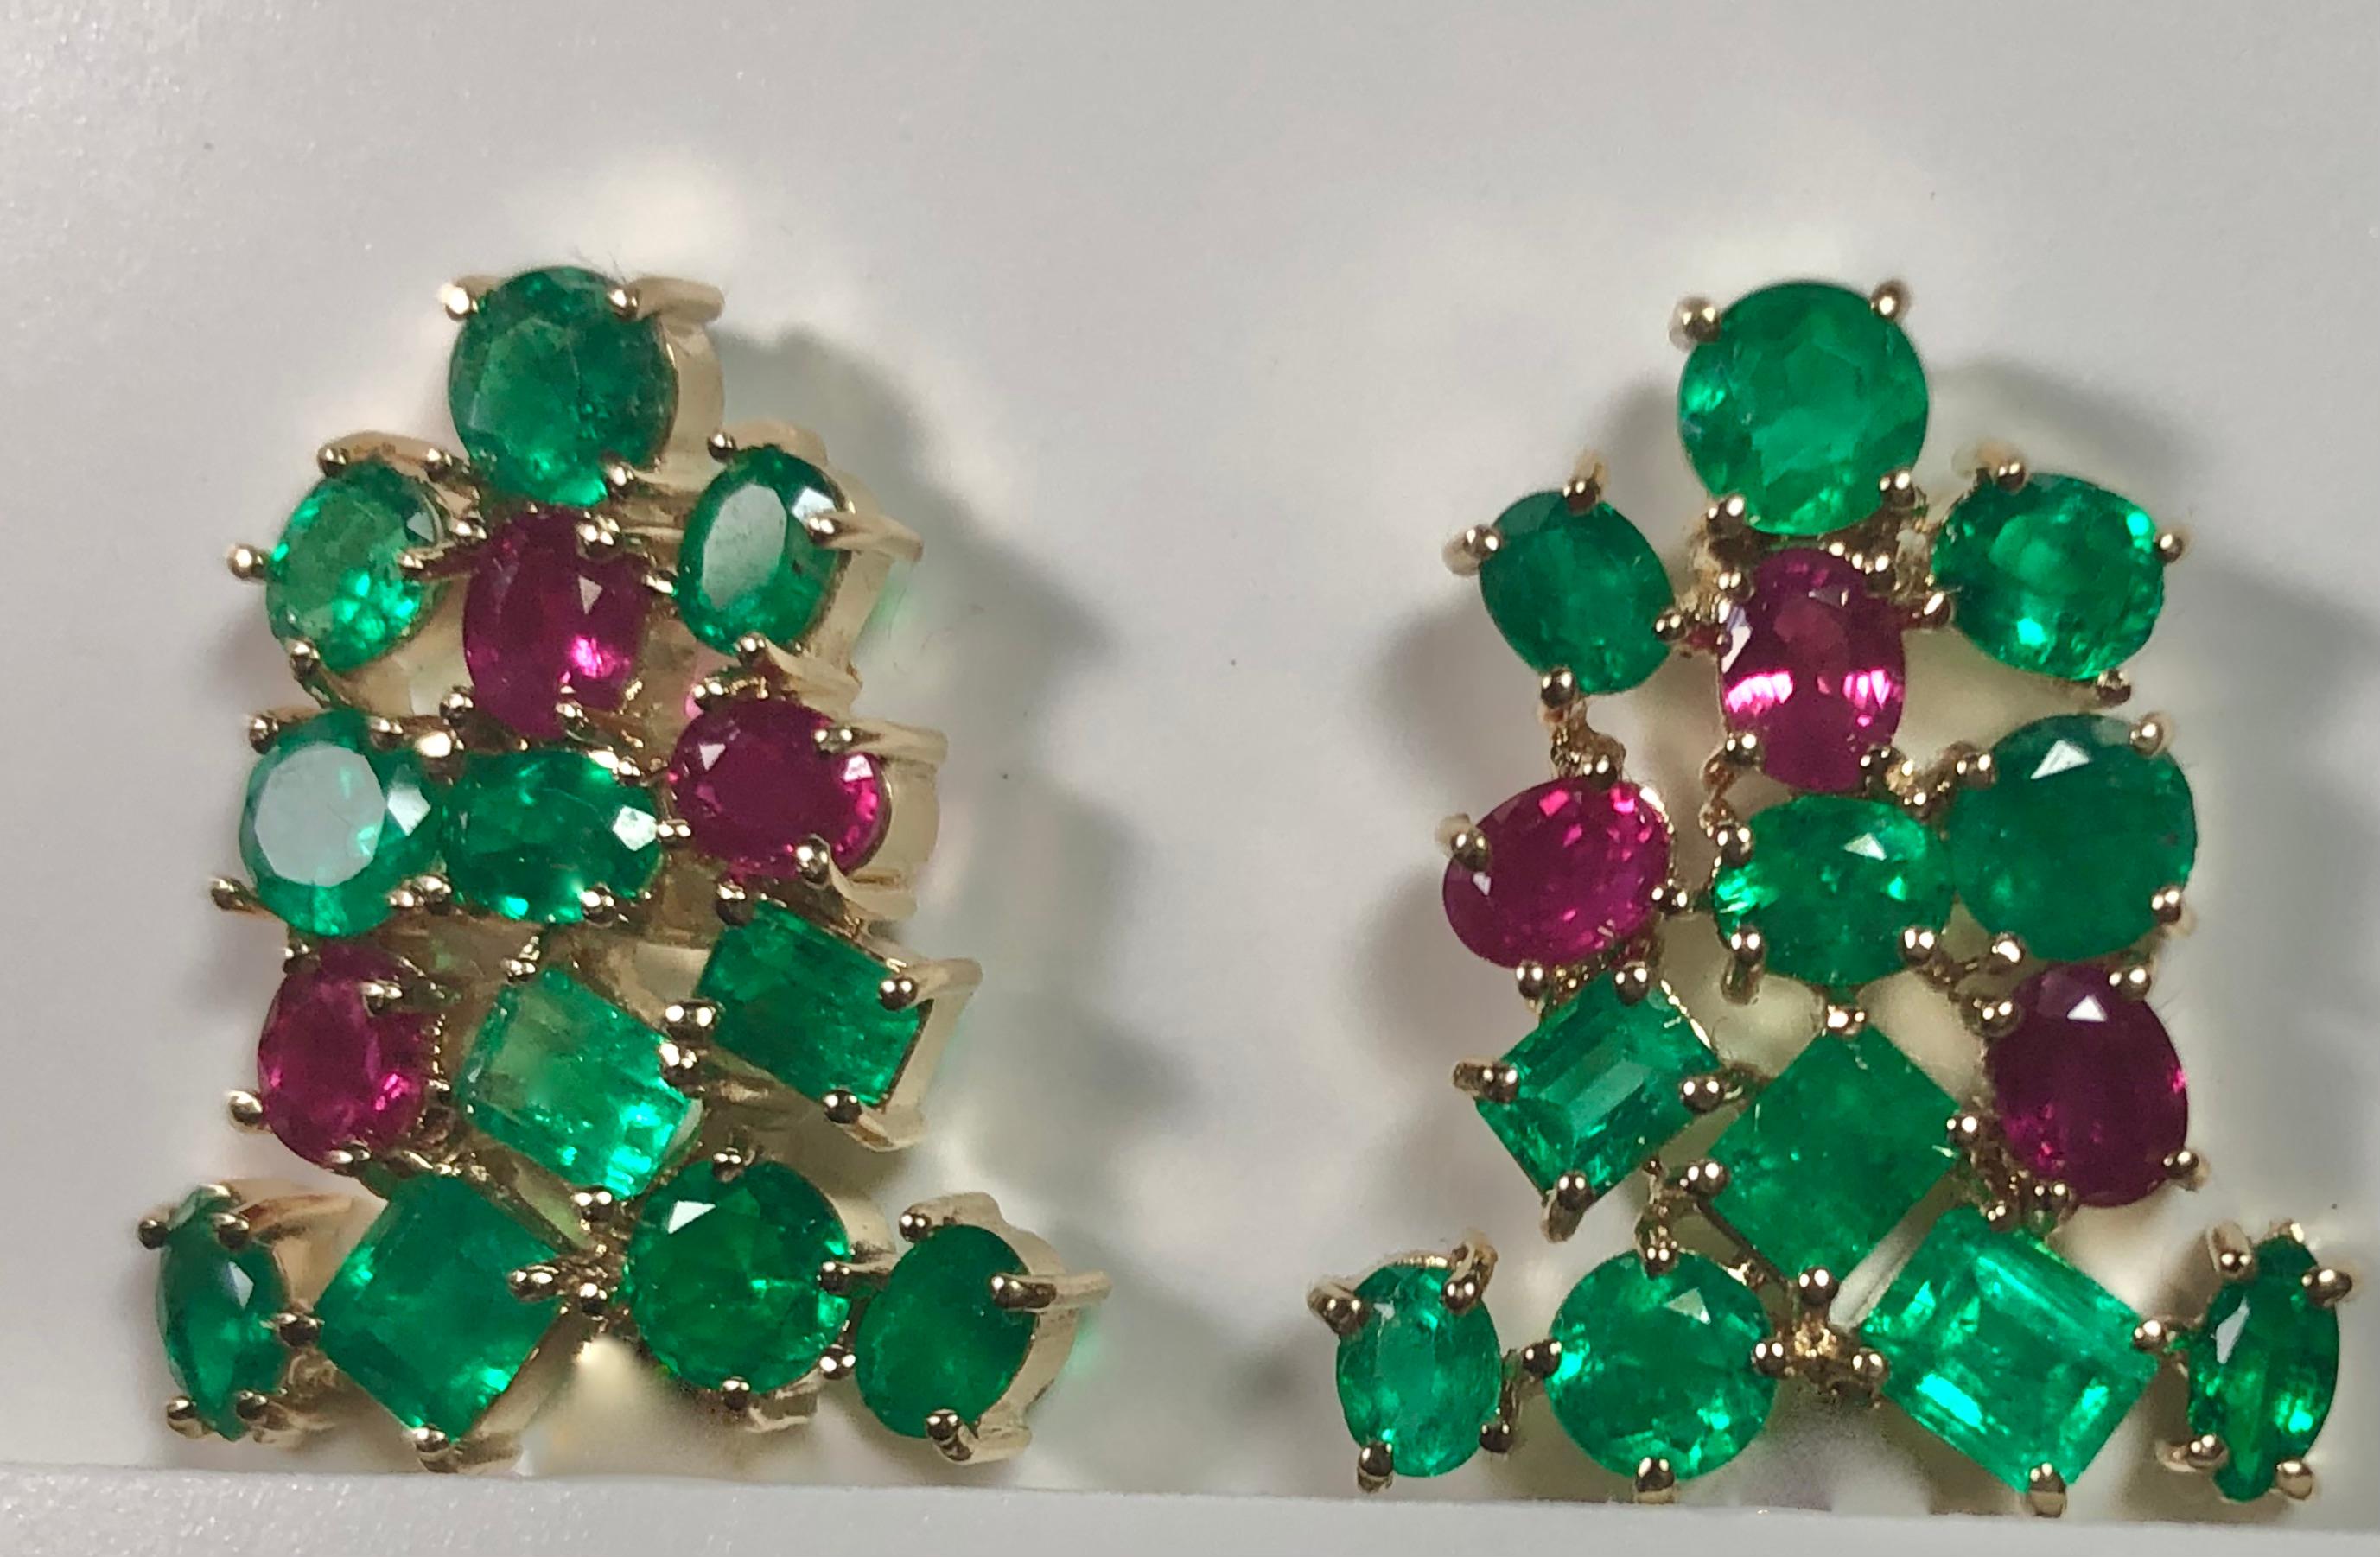 Fine Colombian Emerald and Ruby Statement Stud Earrings Set in 18K Yellow Gold.   
Colombian emerald: Approx. 5.00 carats weight. 
Ruby: Approx. 1.50 carats weight. 
Gemstone total weight: 6.50 Carats.
Stud earrings measurements: 21.00mm x